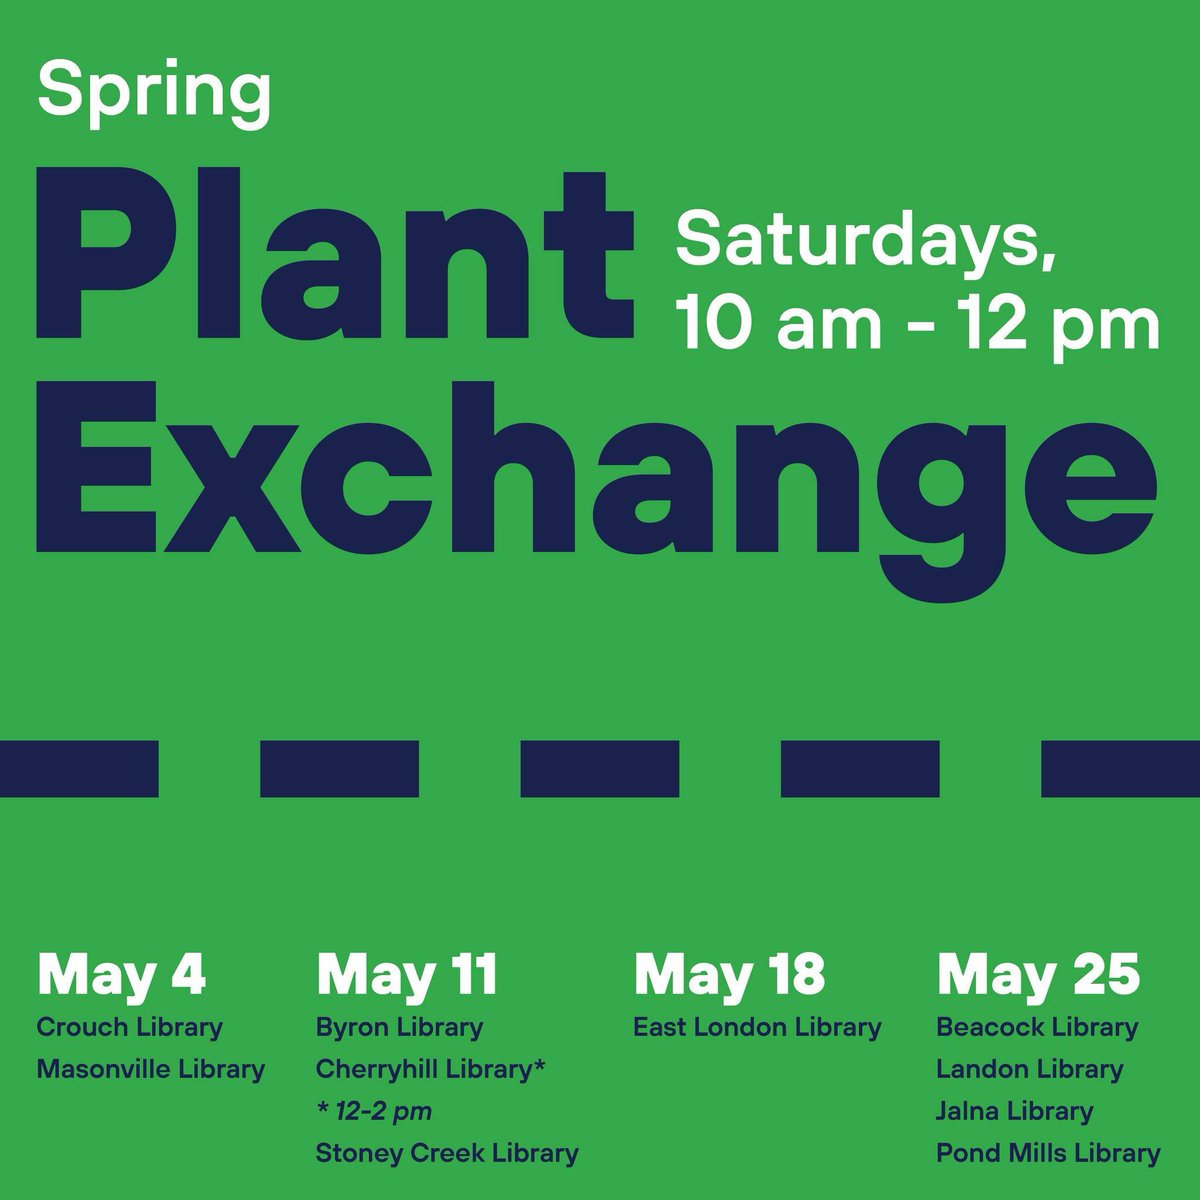 Spring Plant Exchanges start this Saturday! 🌸🌱 Bring your labelled plants to Crouch and Masonville Branches on May 4 from 10am-noon to exchange with others. New gardeners welcome, too!